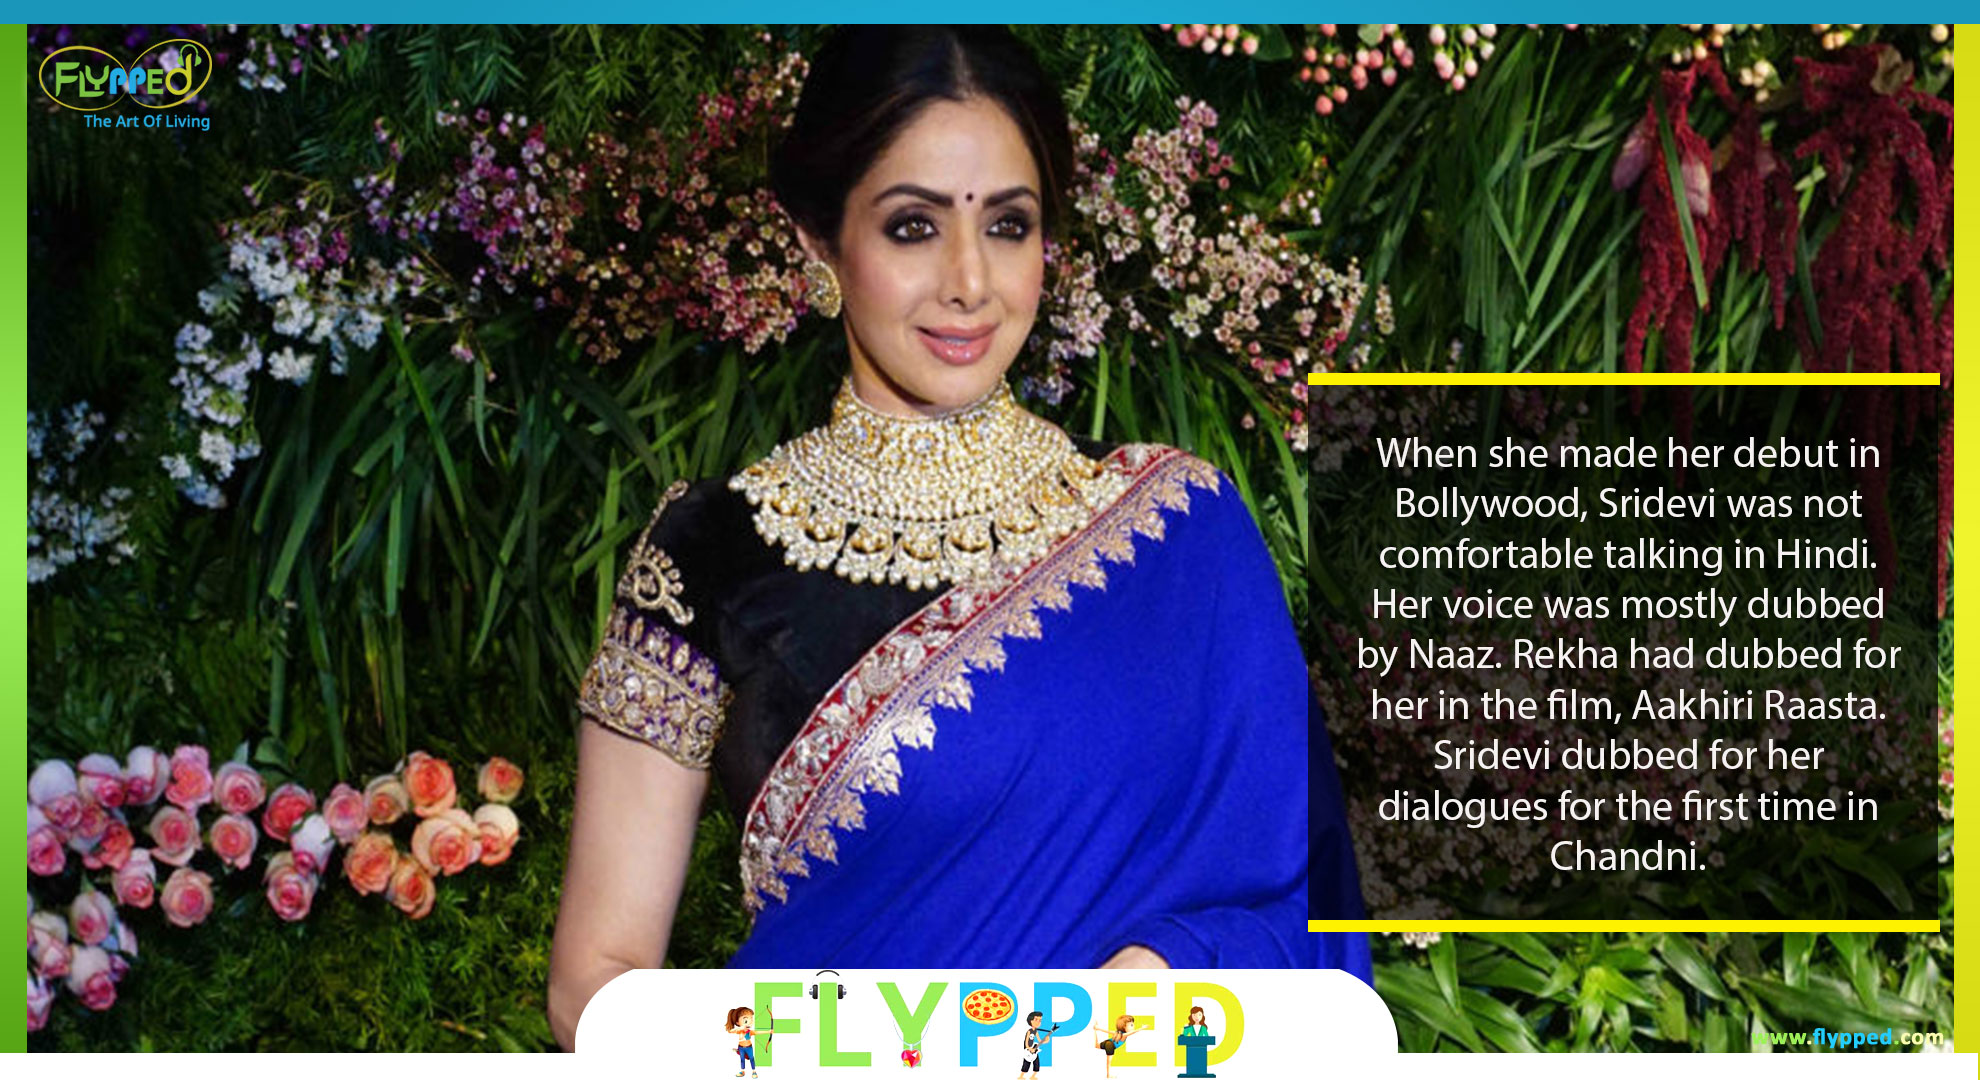 10-Interesting-facts-we-bet-you-didn't-know-about-Sridevi6